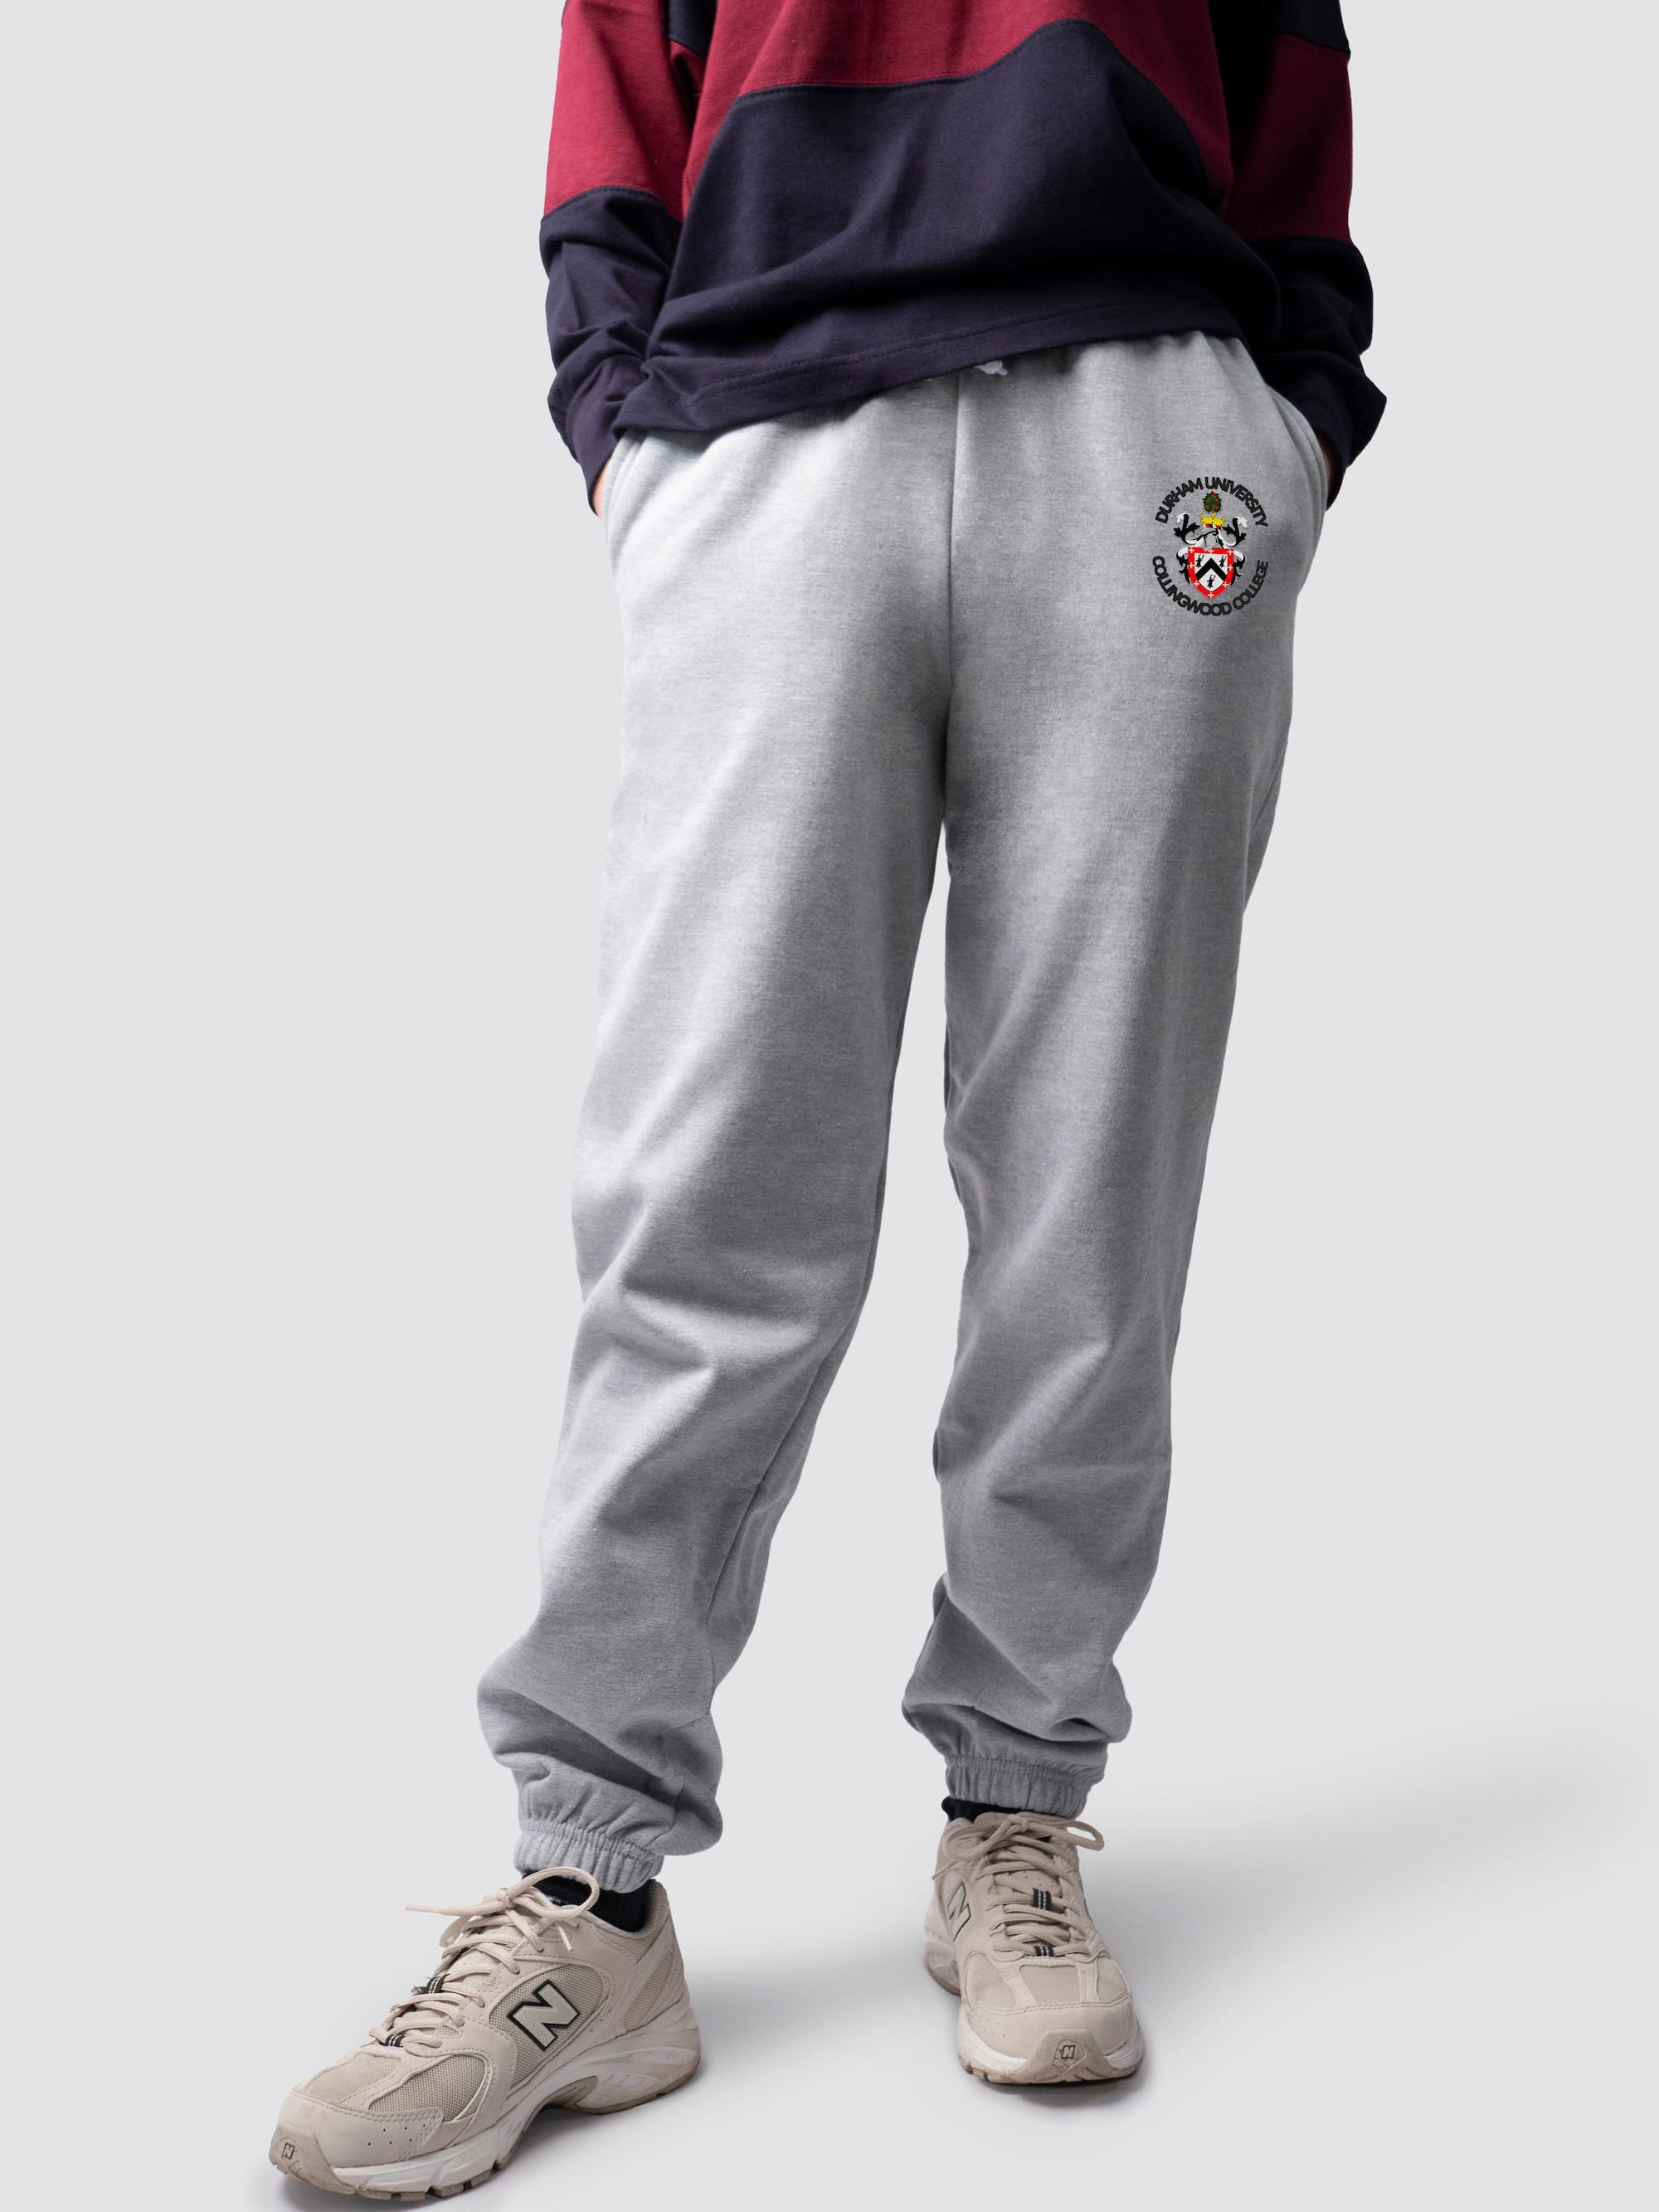 undergraduate cuffed sweatpants, made from soft cotton fabric, with Collingwood logo